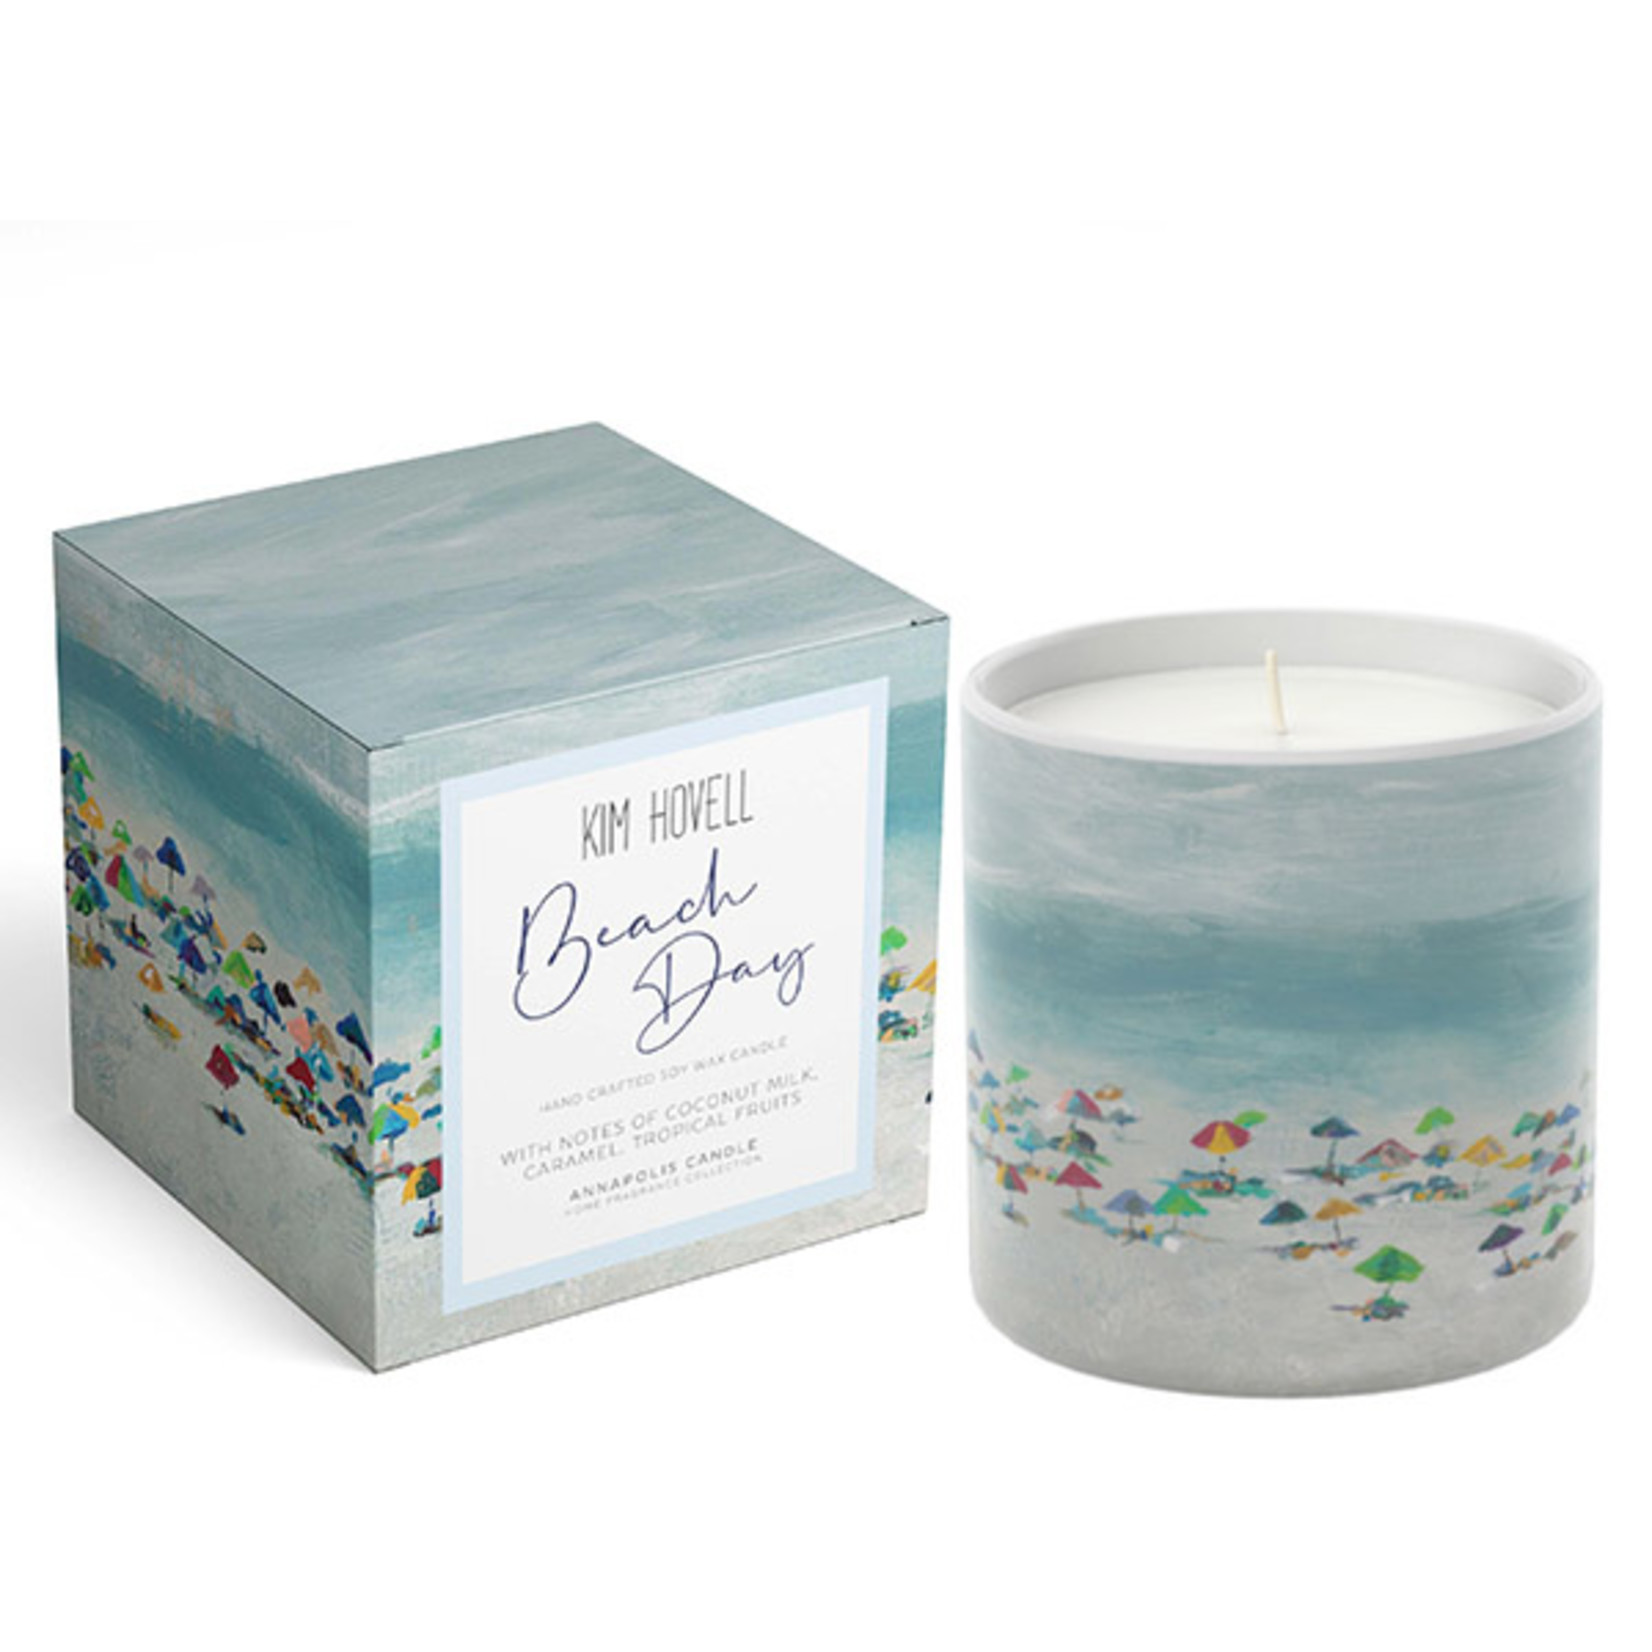 Annapolis Candle - Kim Hovell - Beach Day Boxed Candle